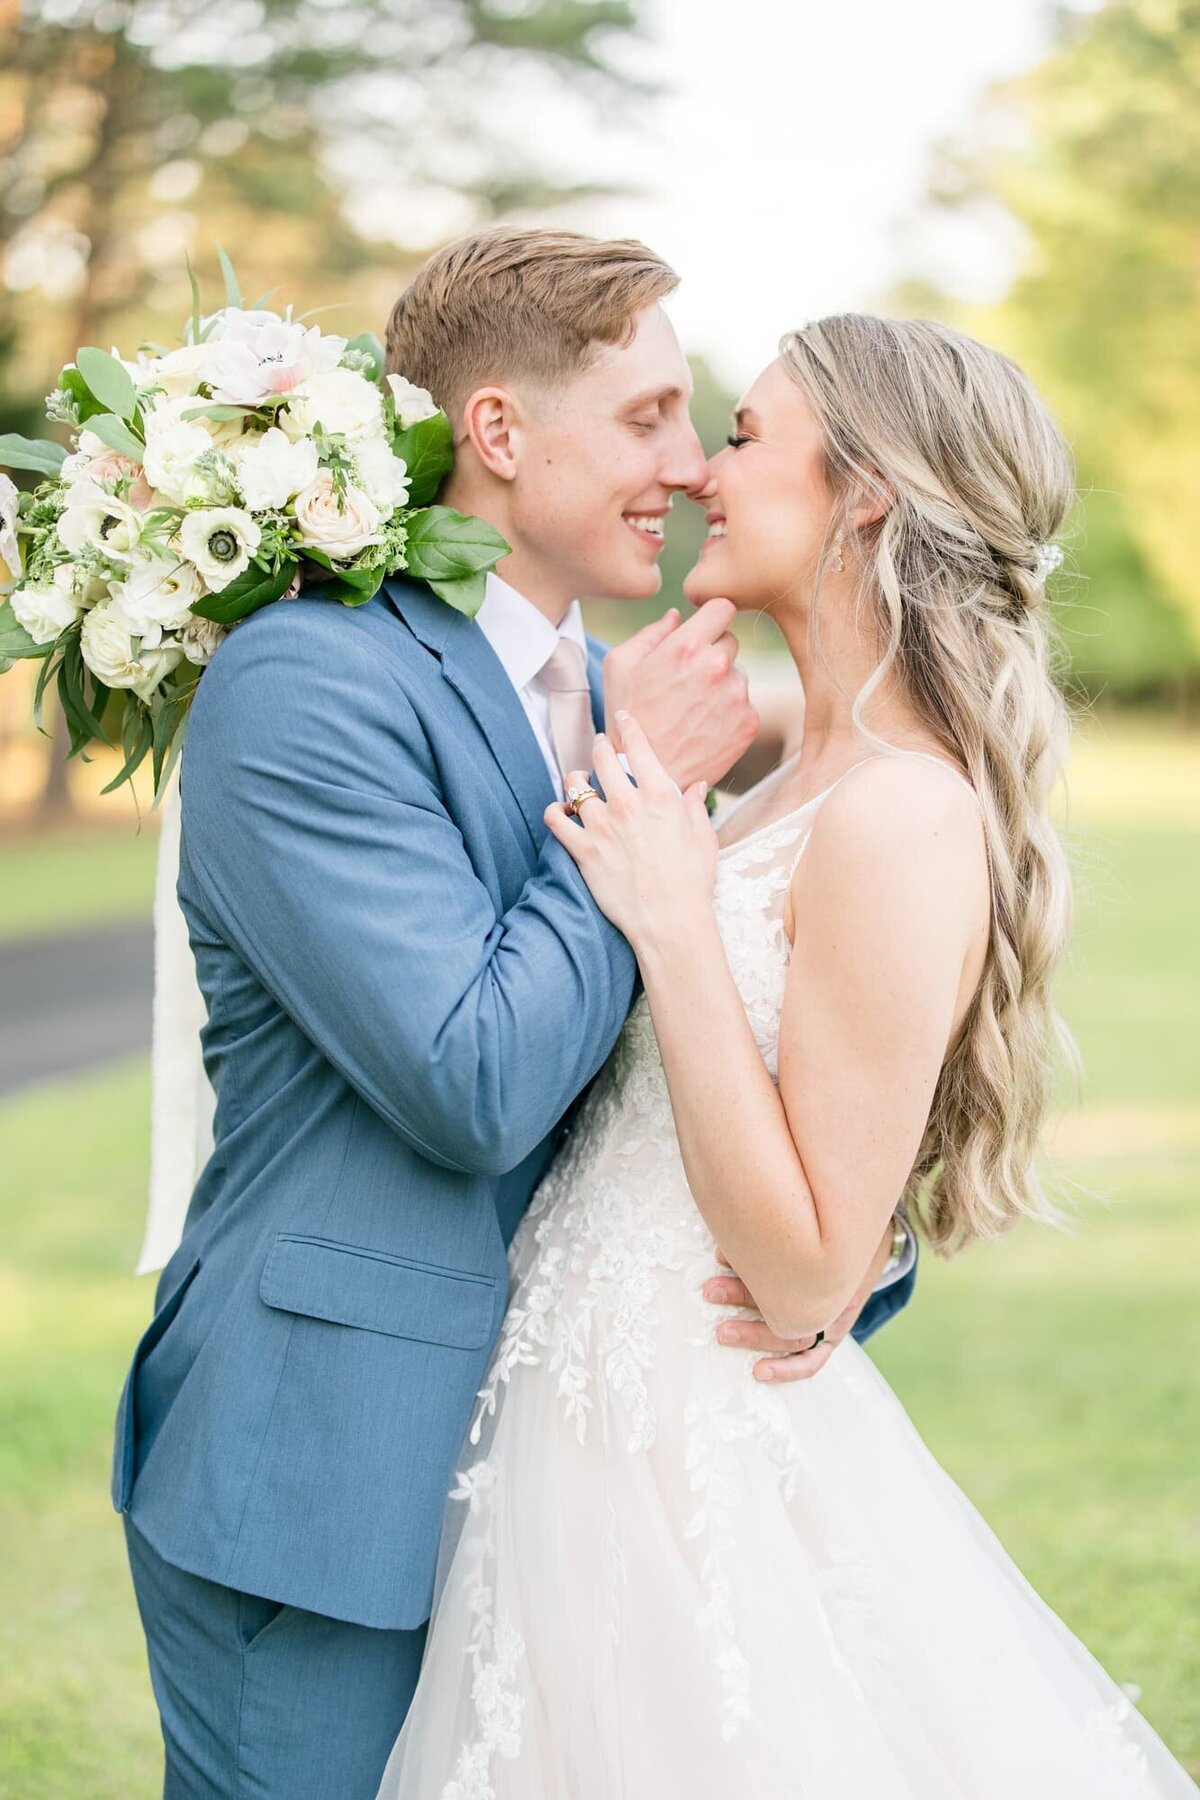 Katie and Alec Wedding Photography Wedding Videography Birmingham, Alabama Husband and Wife Team Photo Video Weddings Engagement Engagements Light Airy Focused on Marriage  Samantha + Connor's Sonne_EKuV